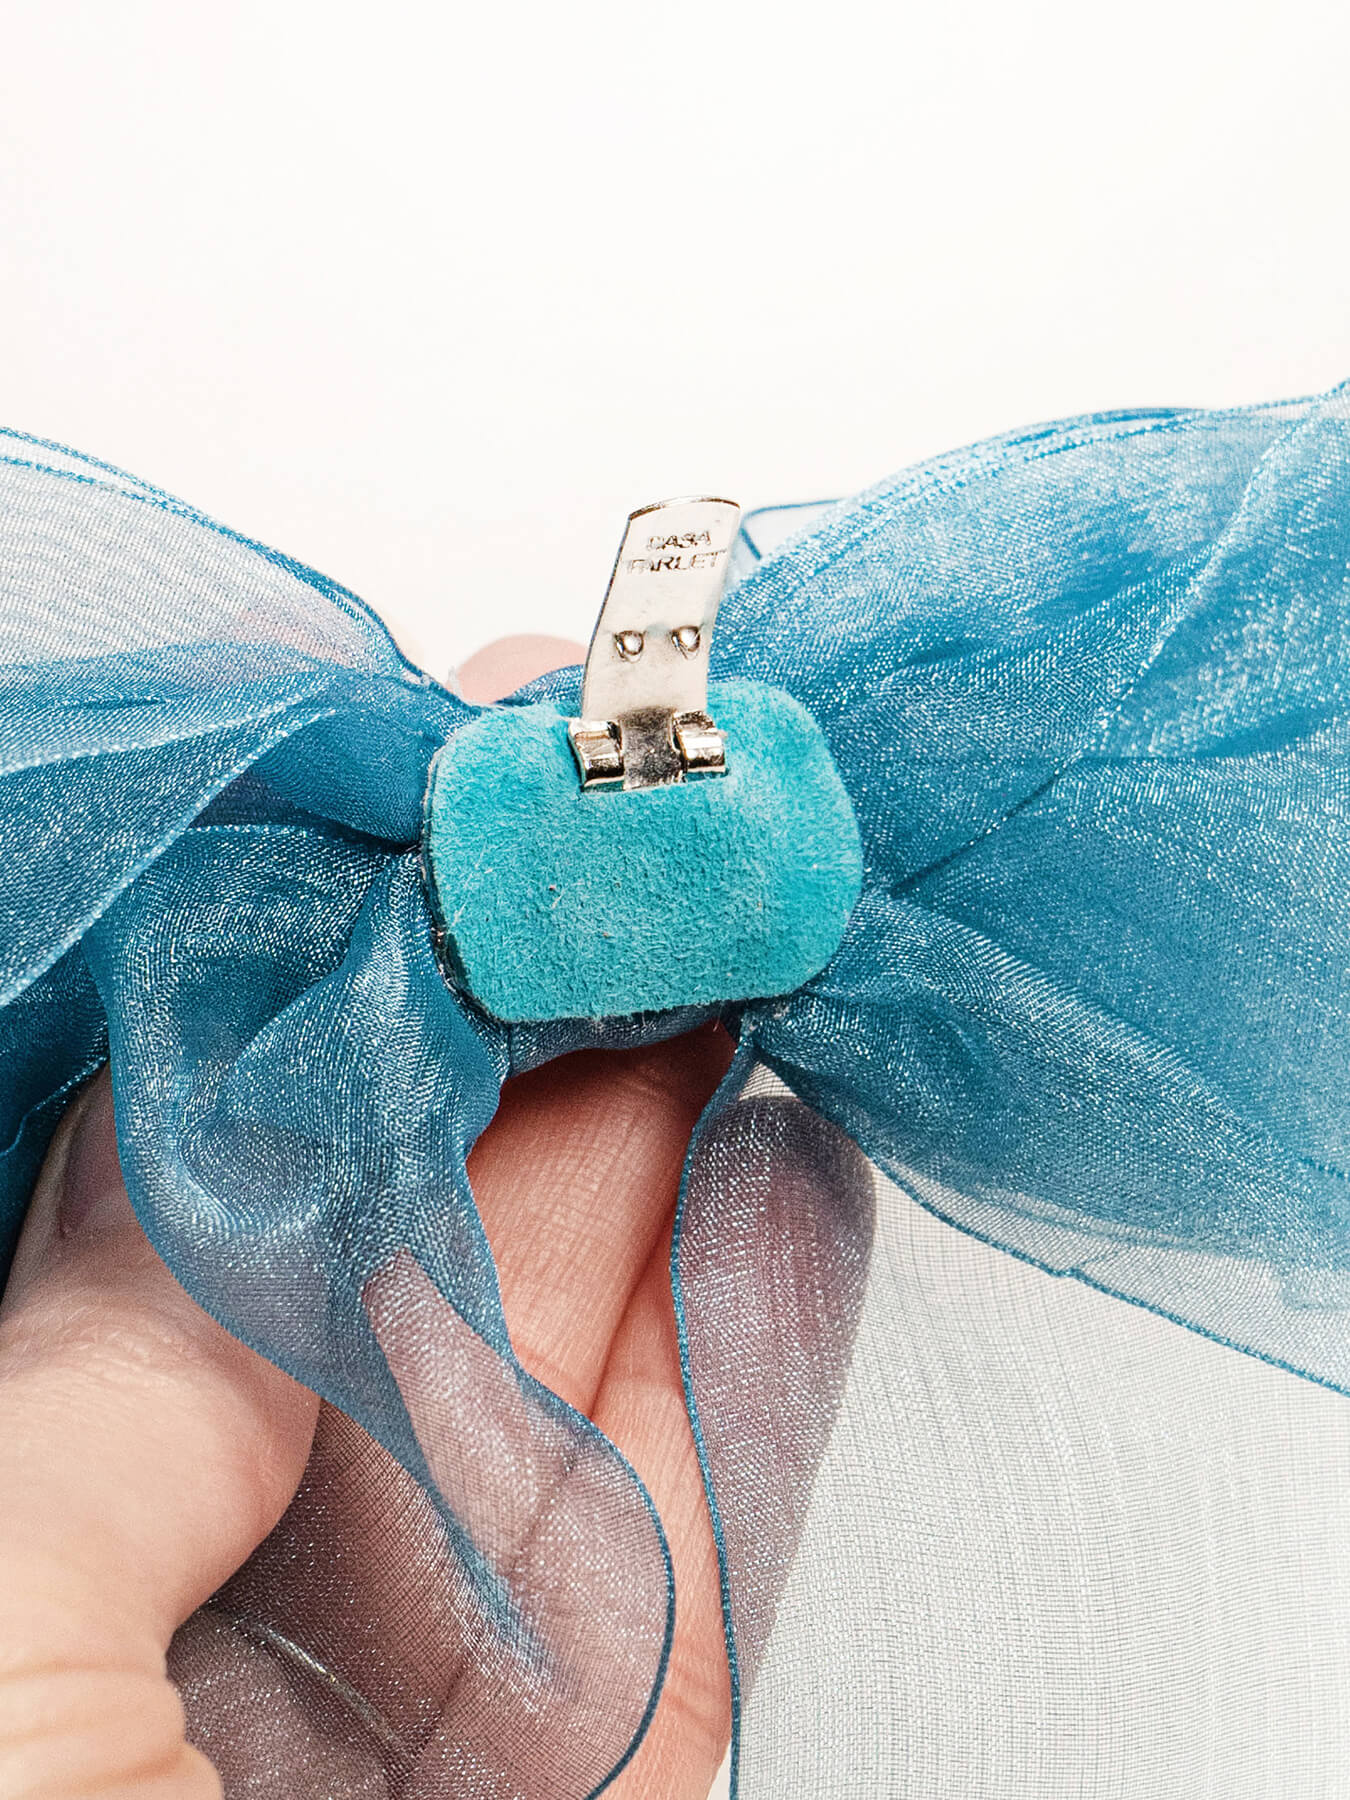 Turquoise Blue Organza Bow